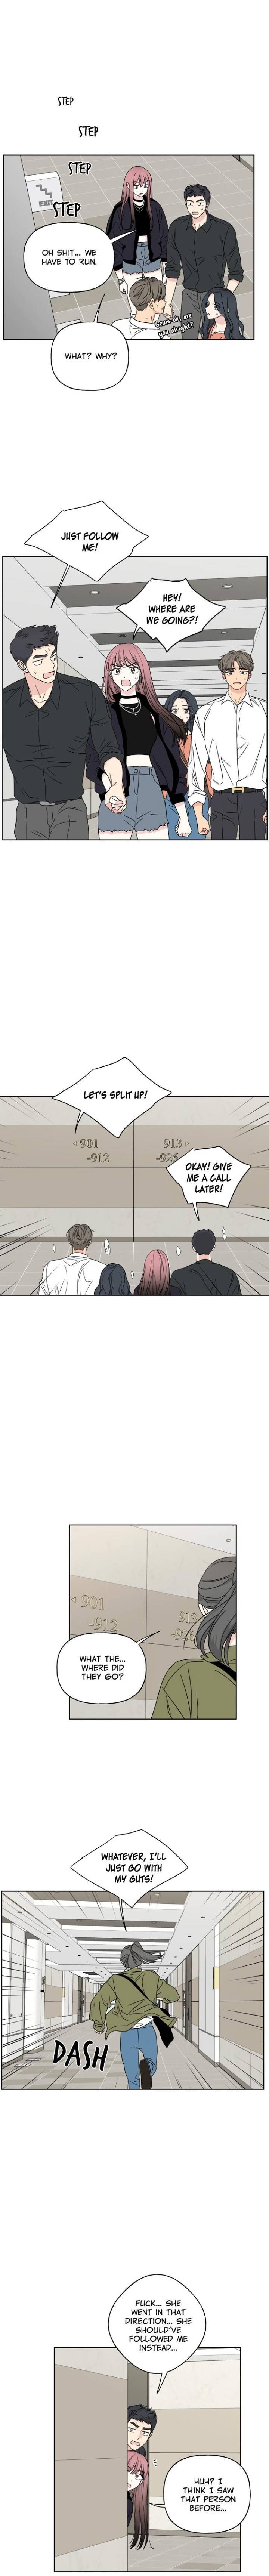 mother-im-sorry-chap-24-7